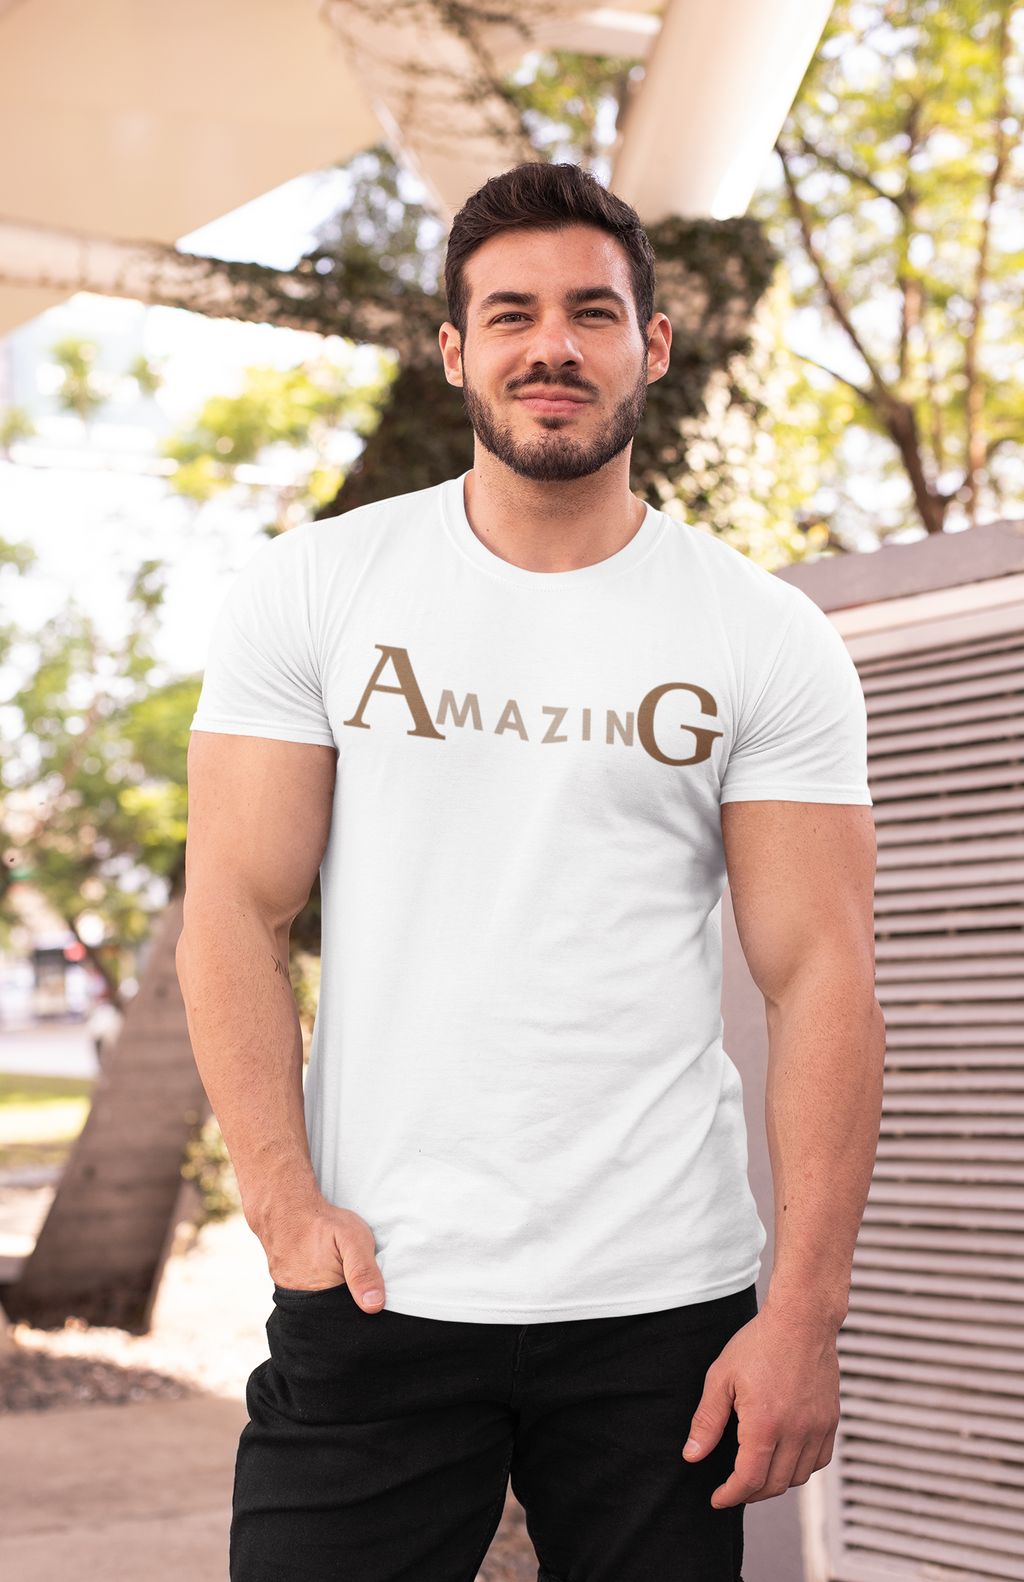 Amazing Unisex Jersey Short Sleeve Tee, Soft Cotton, Gift Item - Cheers Together Gift House